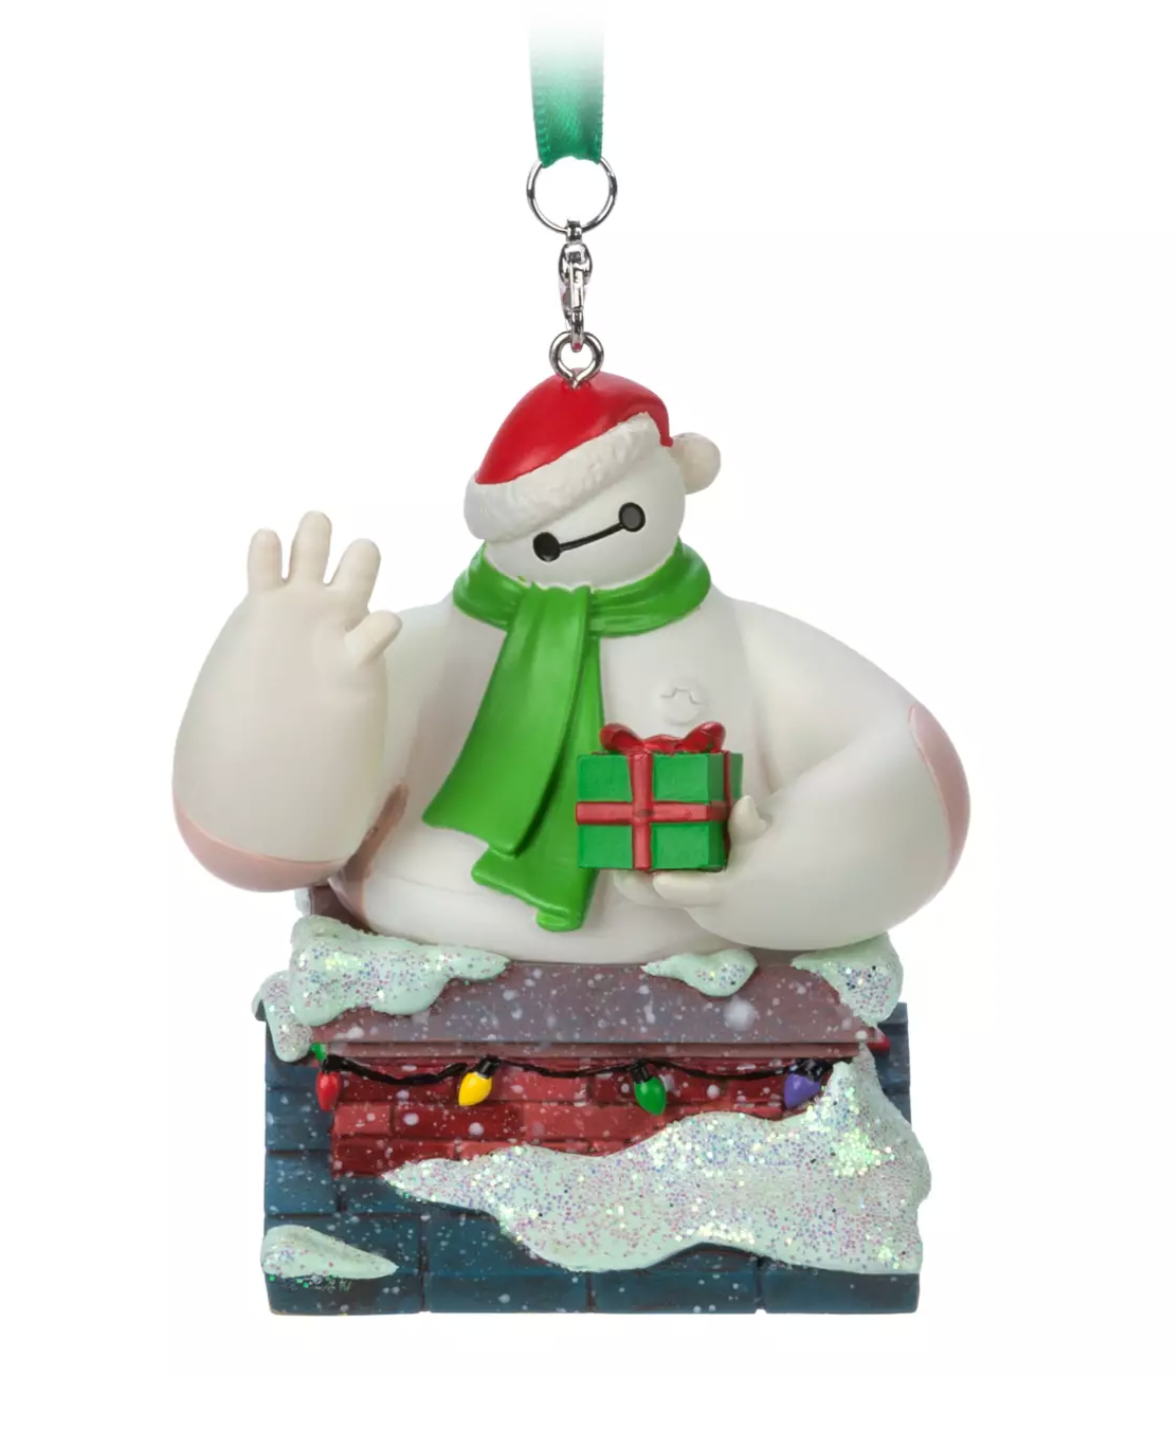 Disney Sketchbook Big Hero 6 Baymax Light-Up Christmas Ornament New with Tag